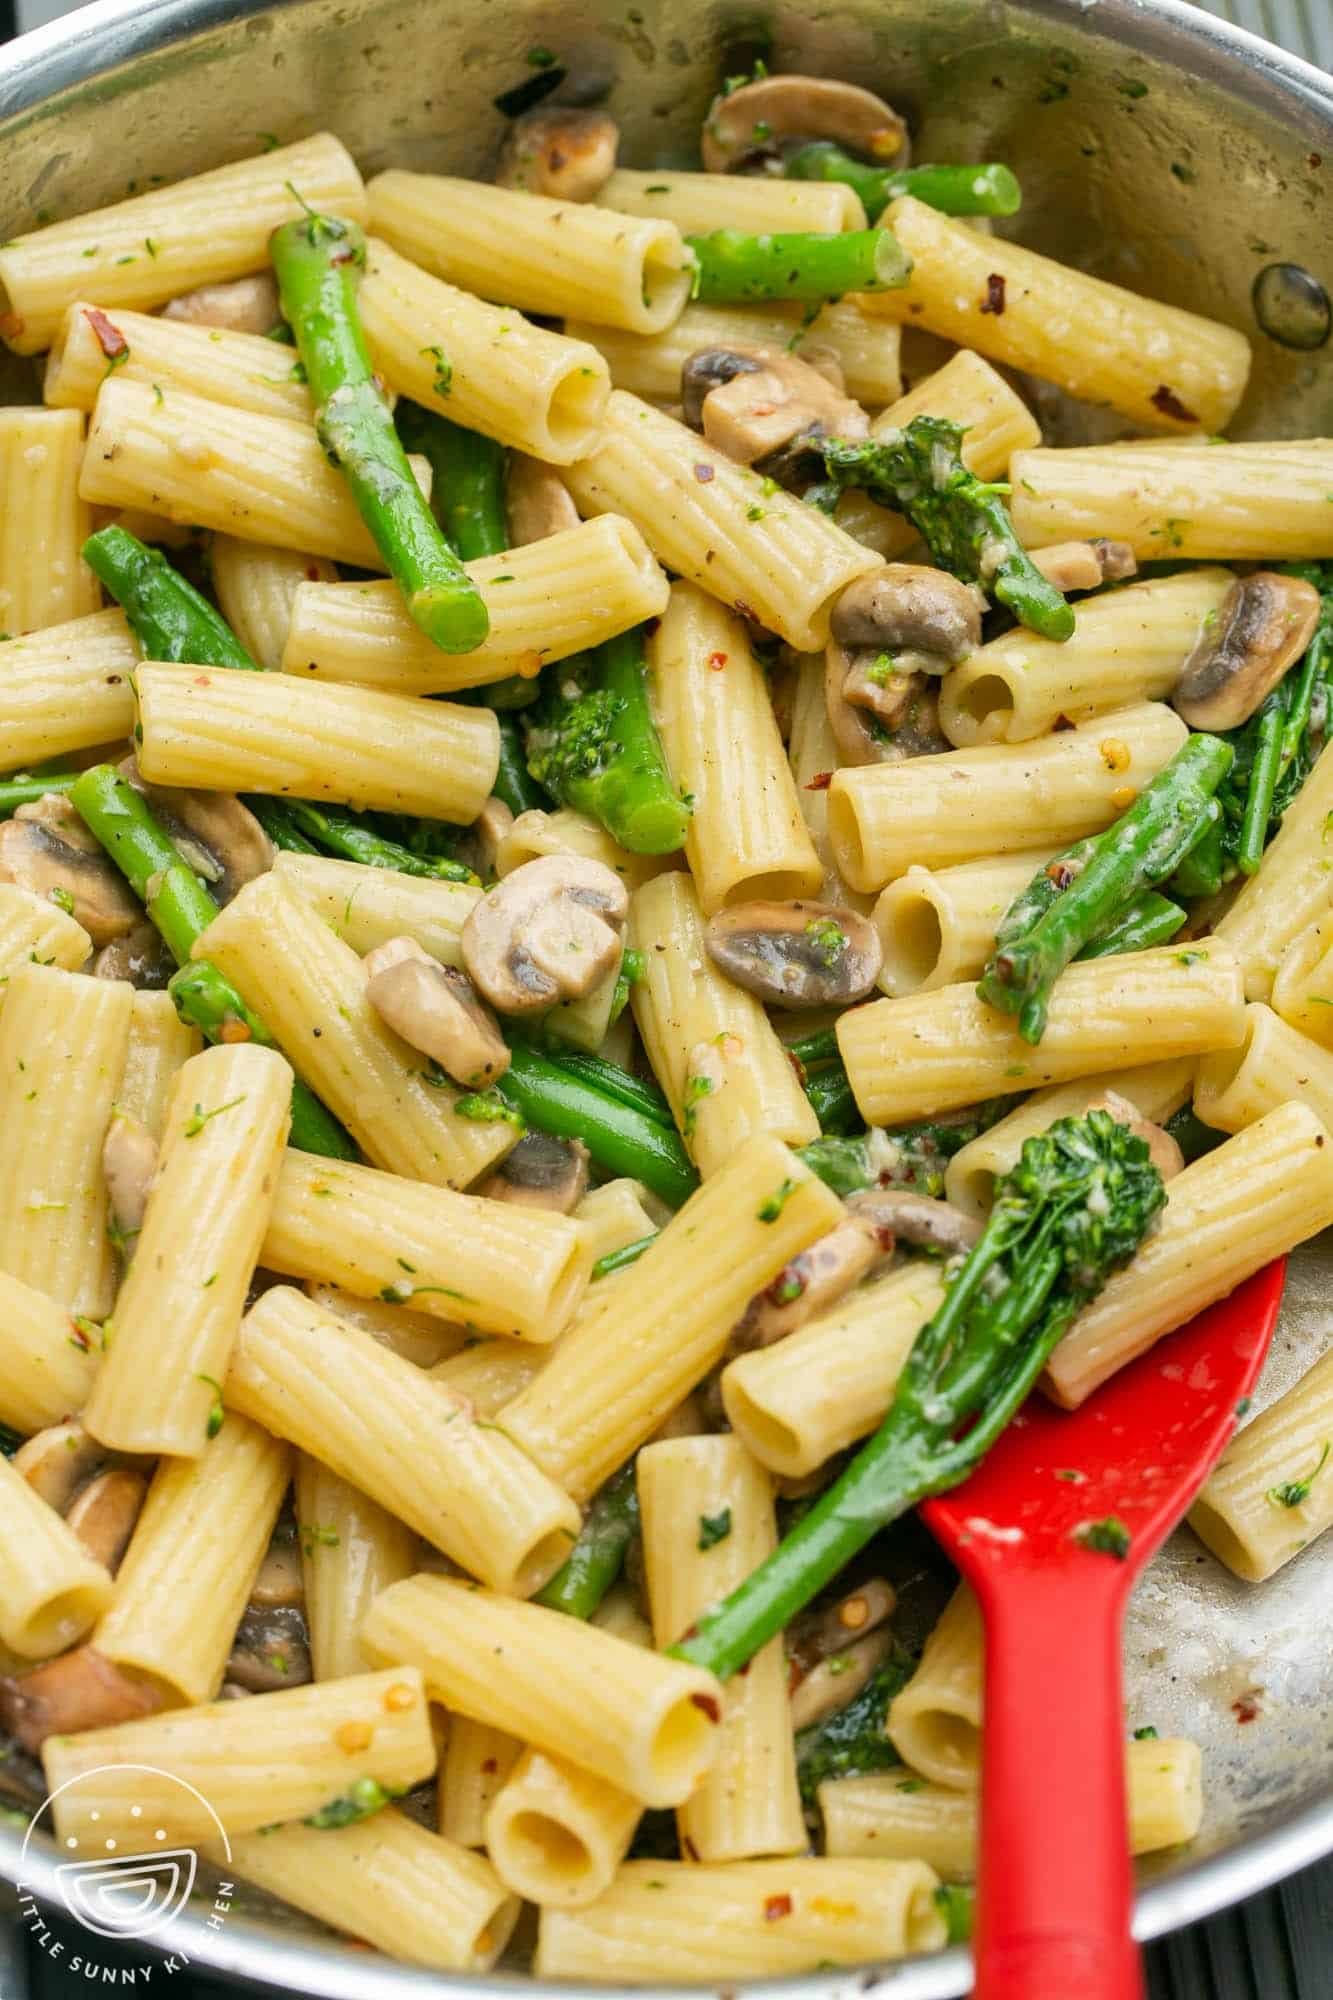 Rigatoni with mushrooms and broccolini in a skillet.